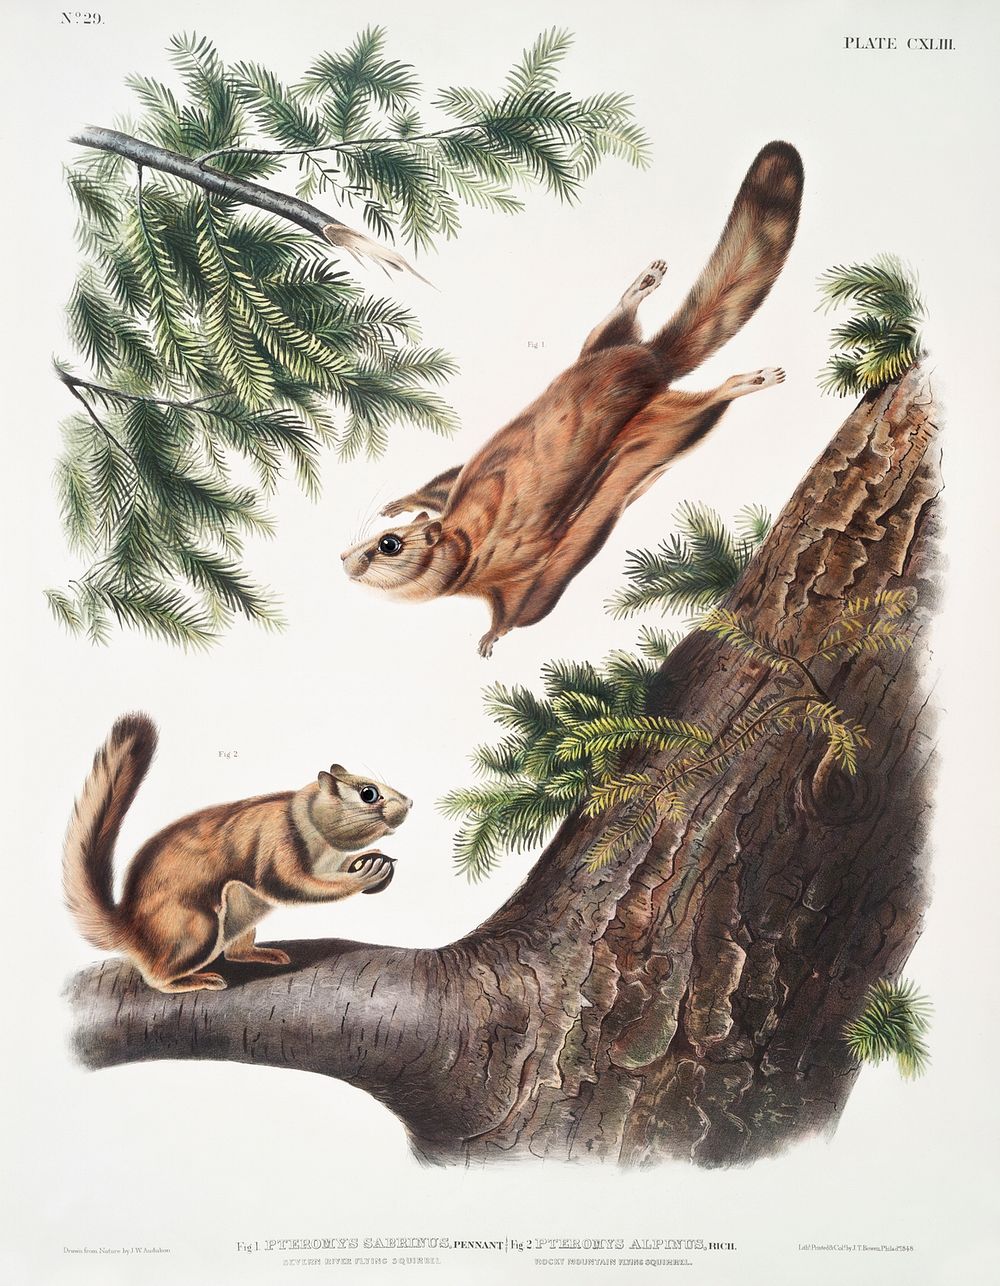 Severn River Flying Squirrel (Pteromys sabrinus) and Rocky Mountain Squirrel (Pteromys alpinus) from the viviparous…